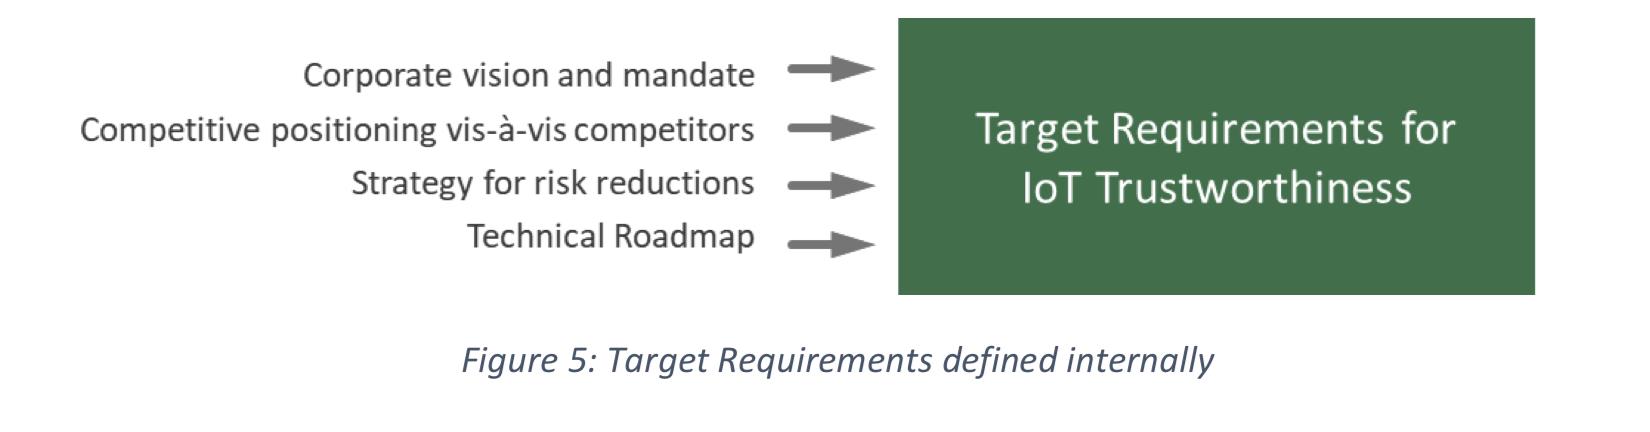 Target Requirements defined internally